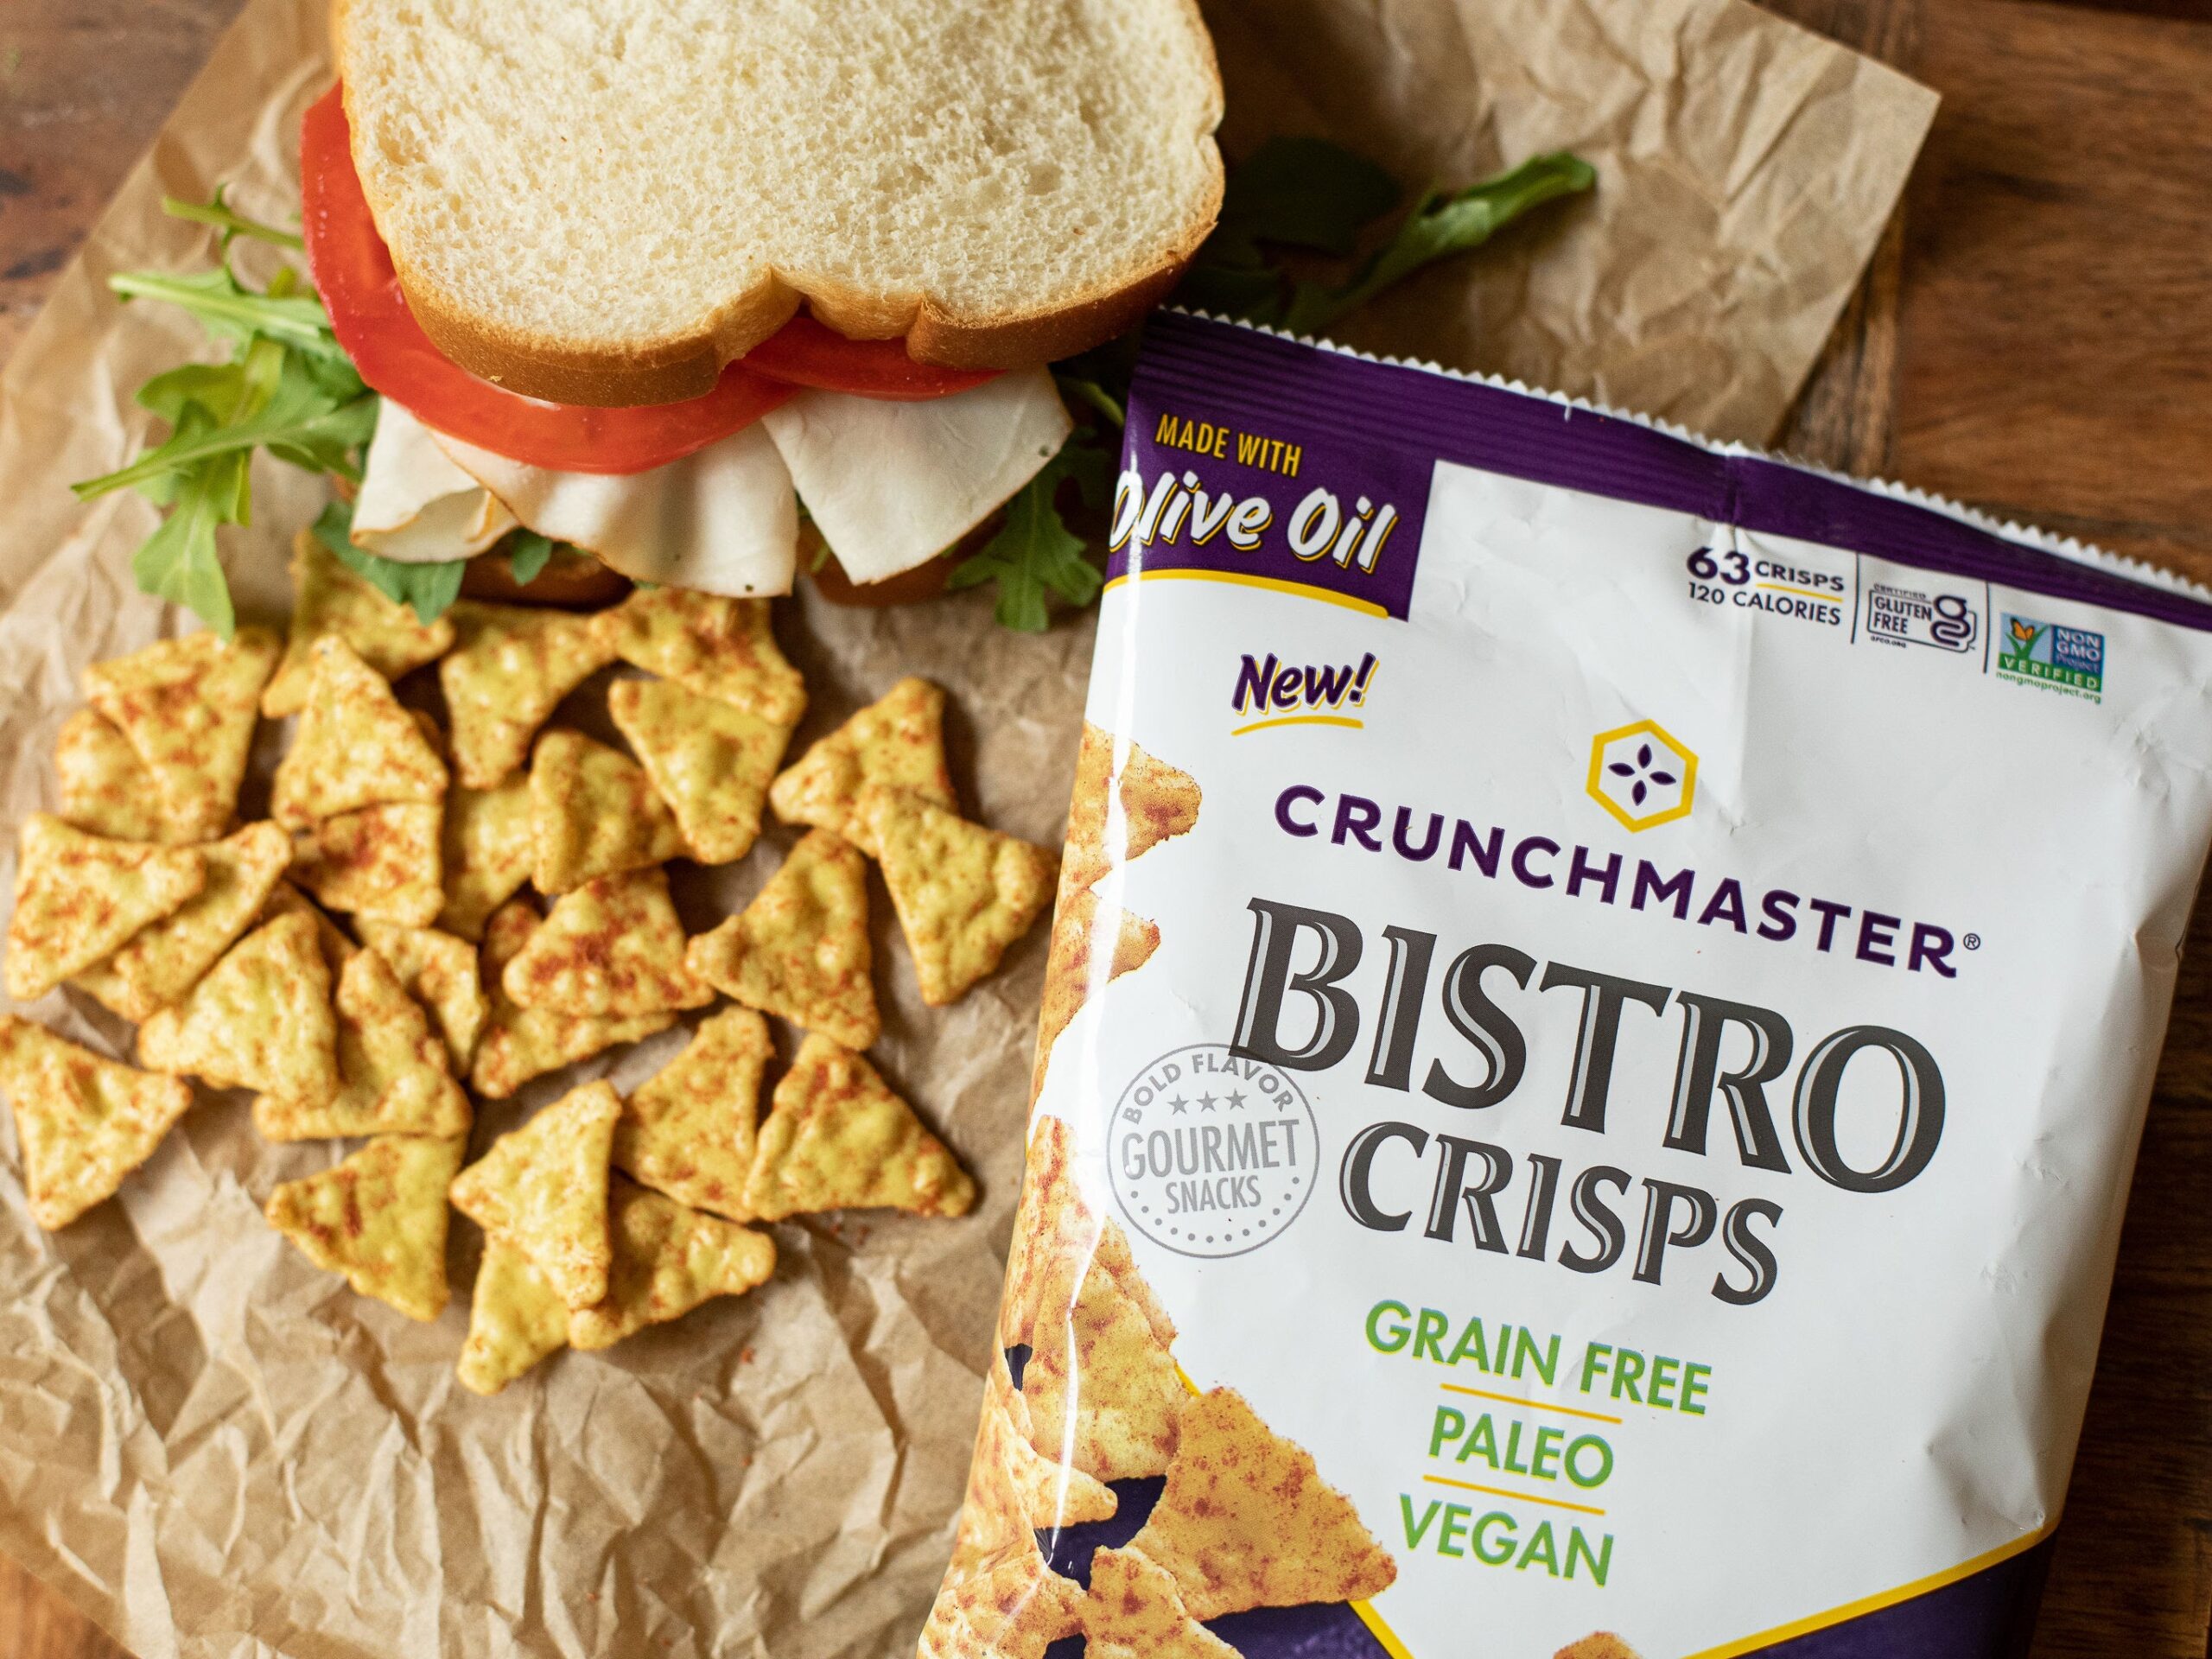 Crunchmaster Bistro Crisps Or Crackers As Low As $2 At Publix